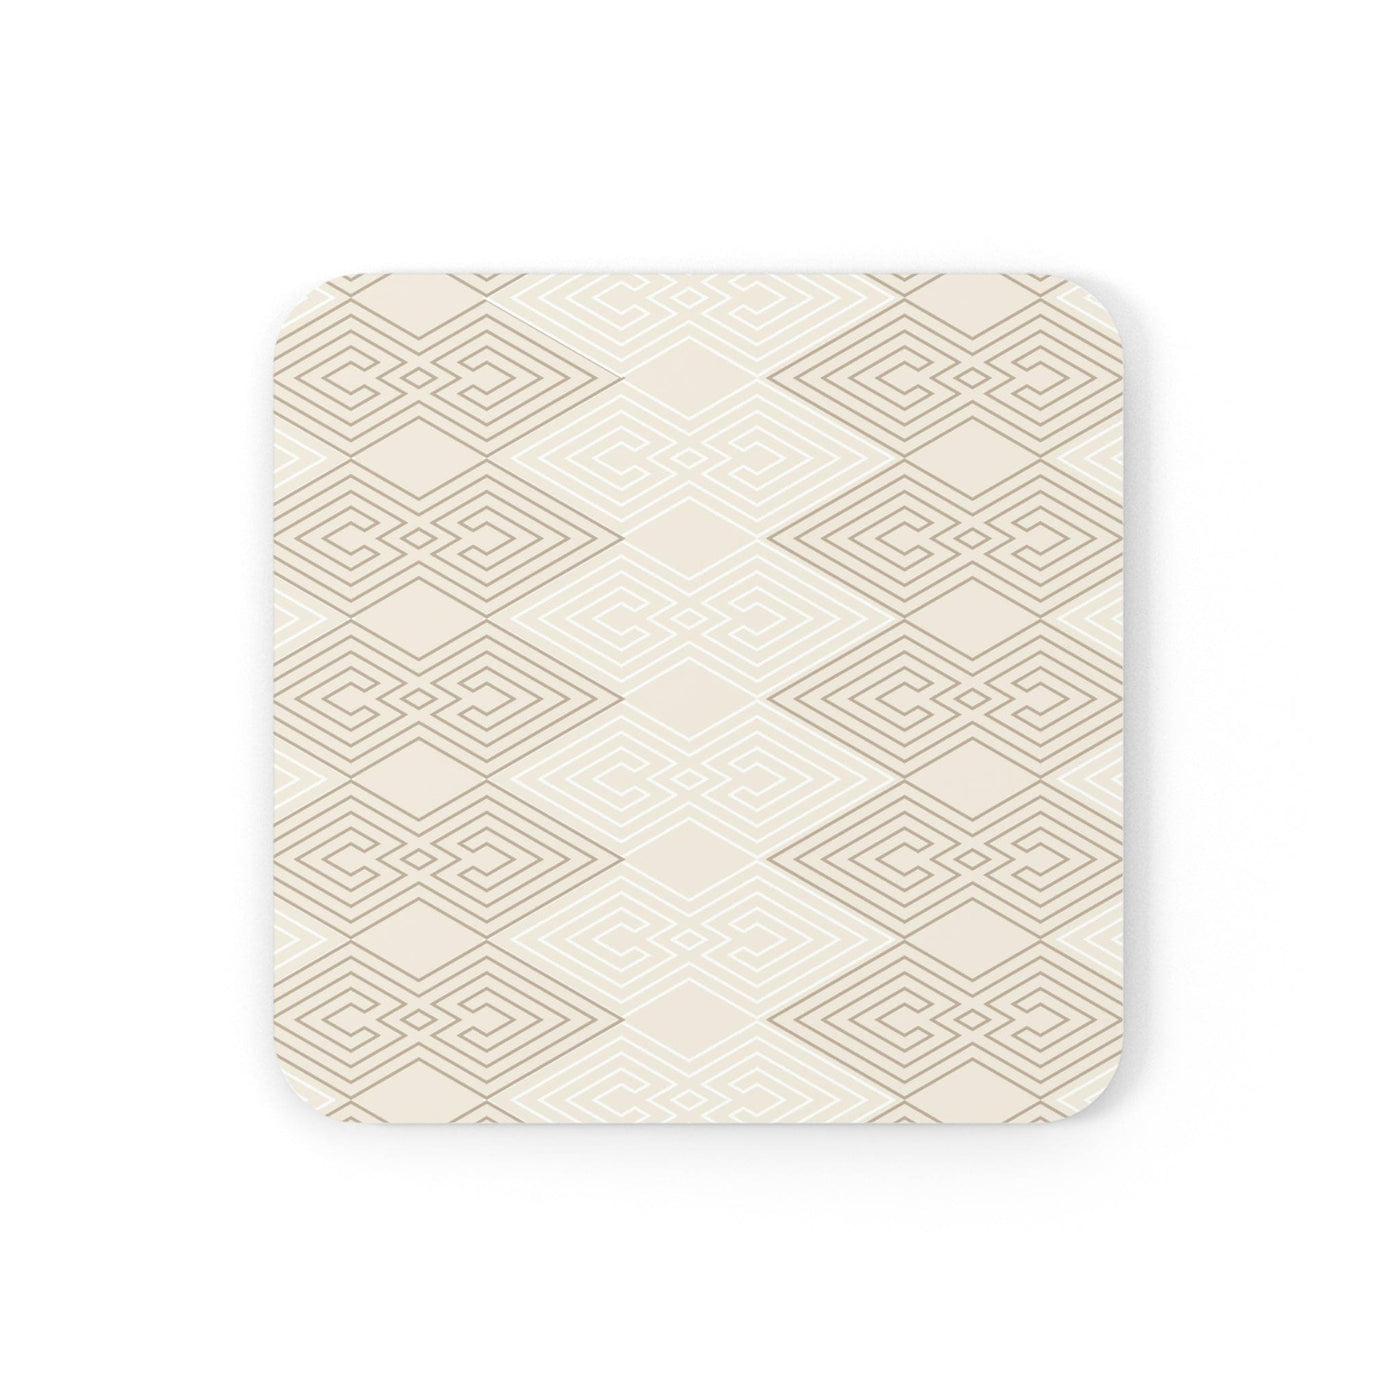 Handcrafted Square Coaster Set Of 4 For Drinks And Cups Beige White Tribal